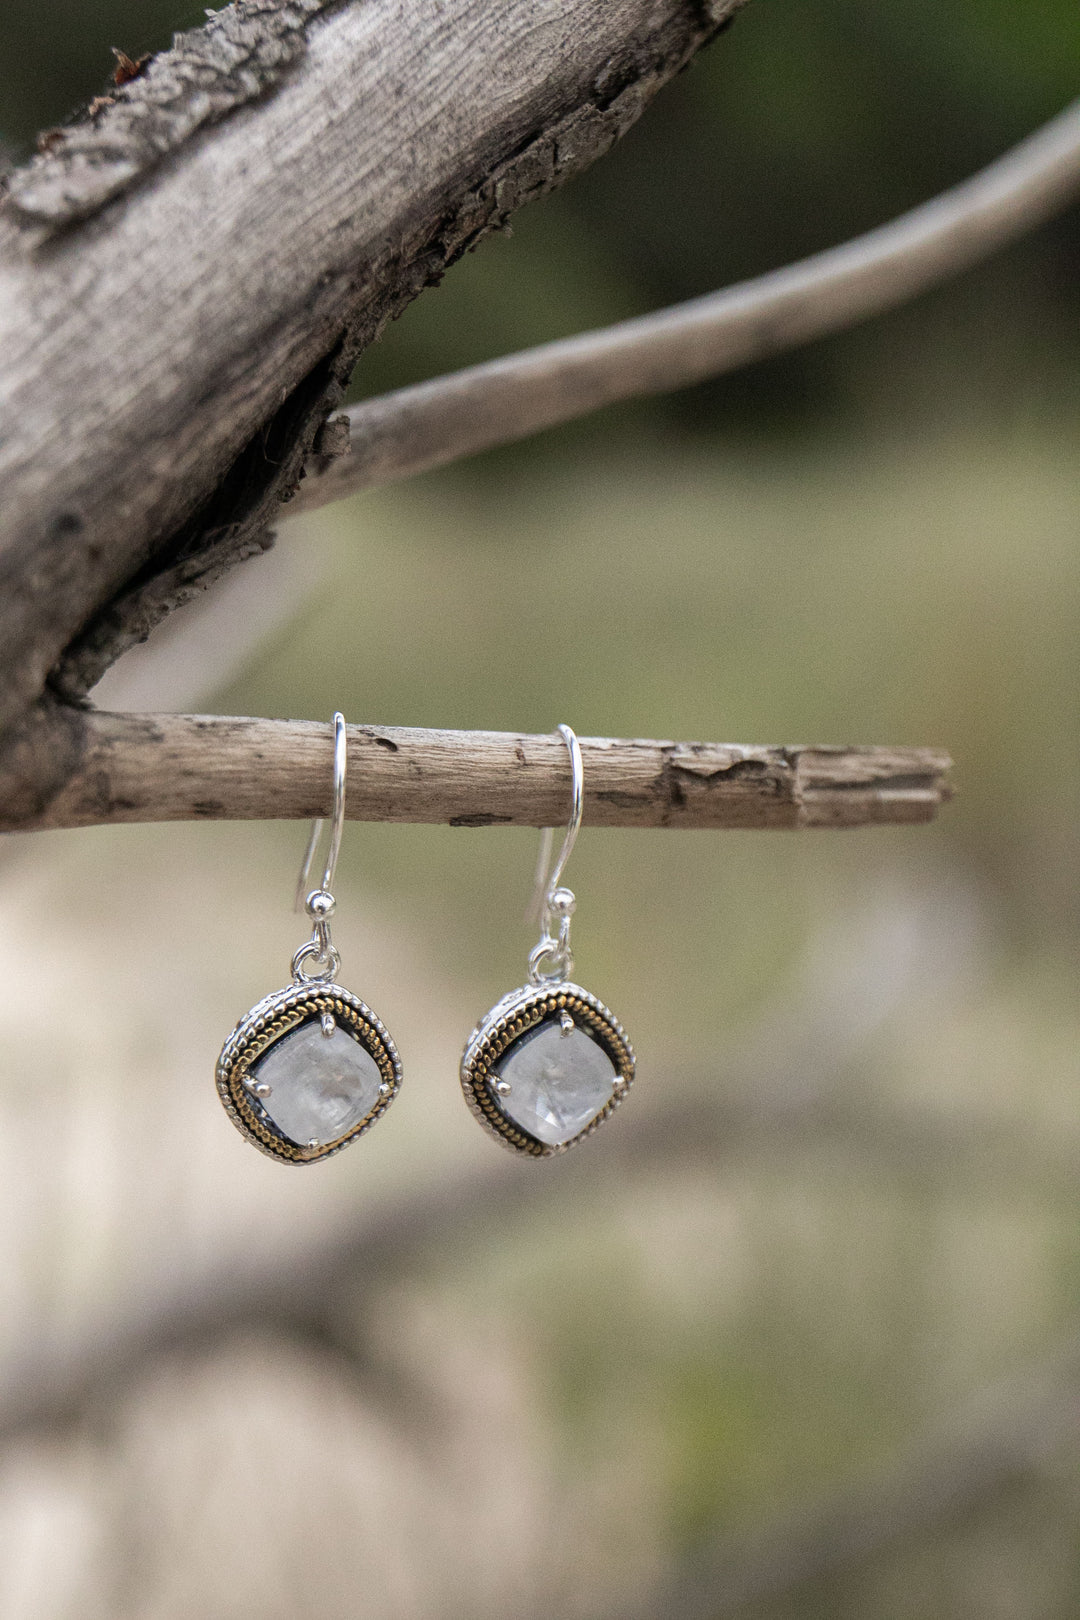 Rainbow Moonstone Earrings in Brass and Sterling Silver Vintage Setting